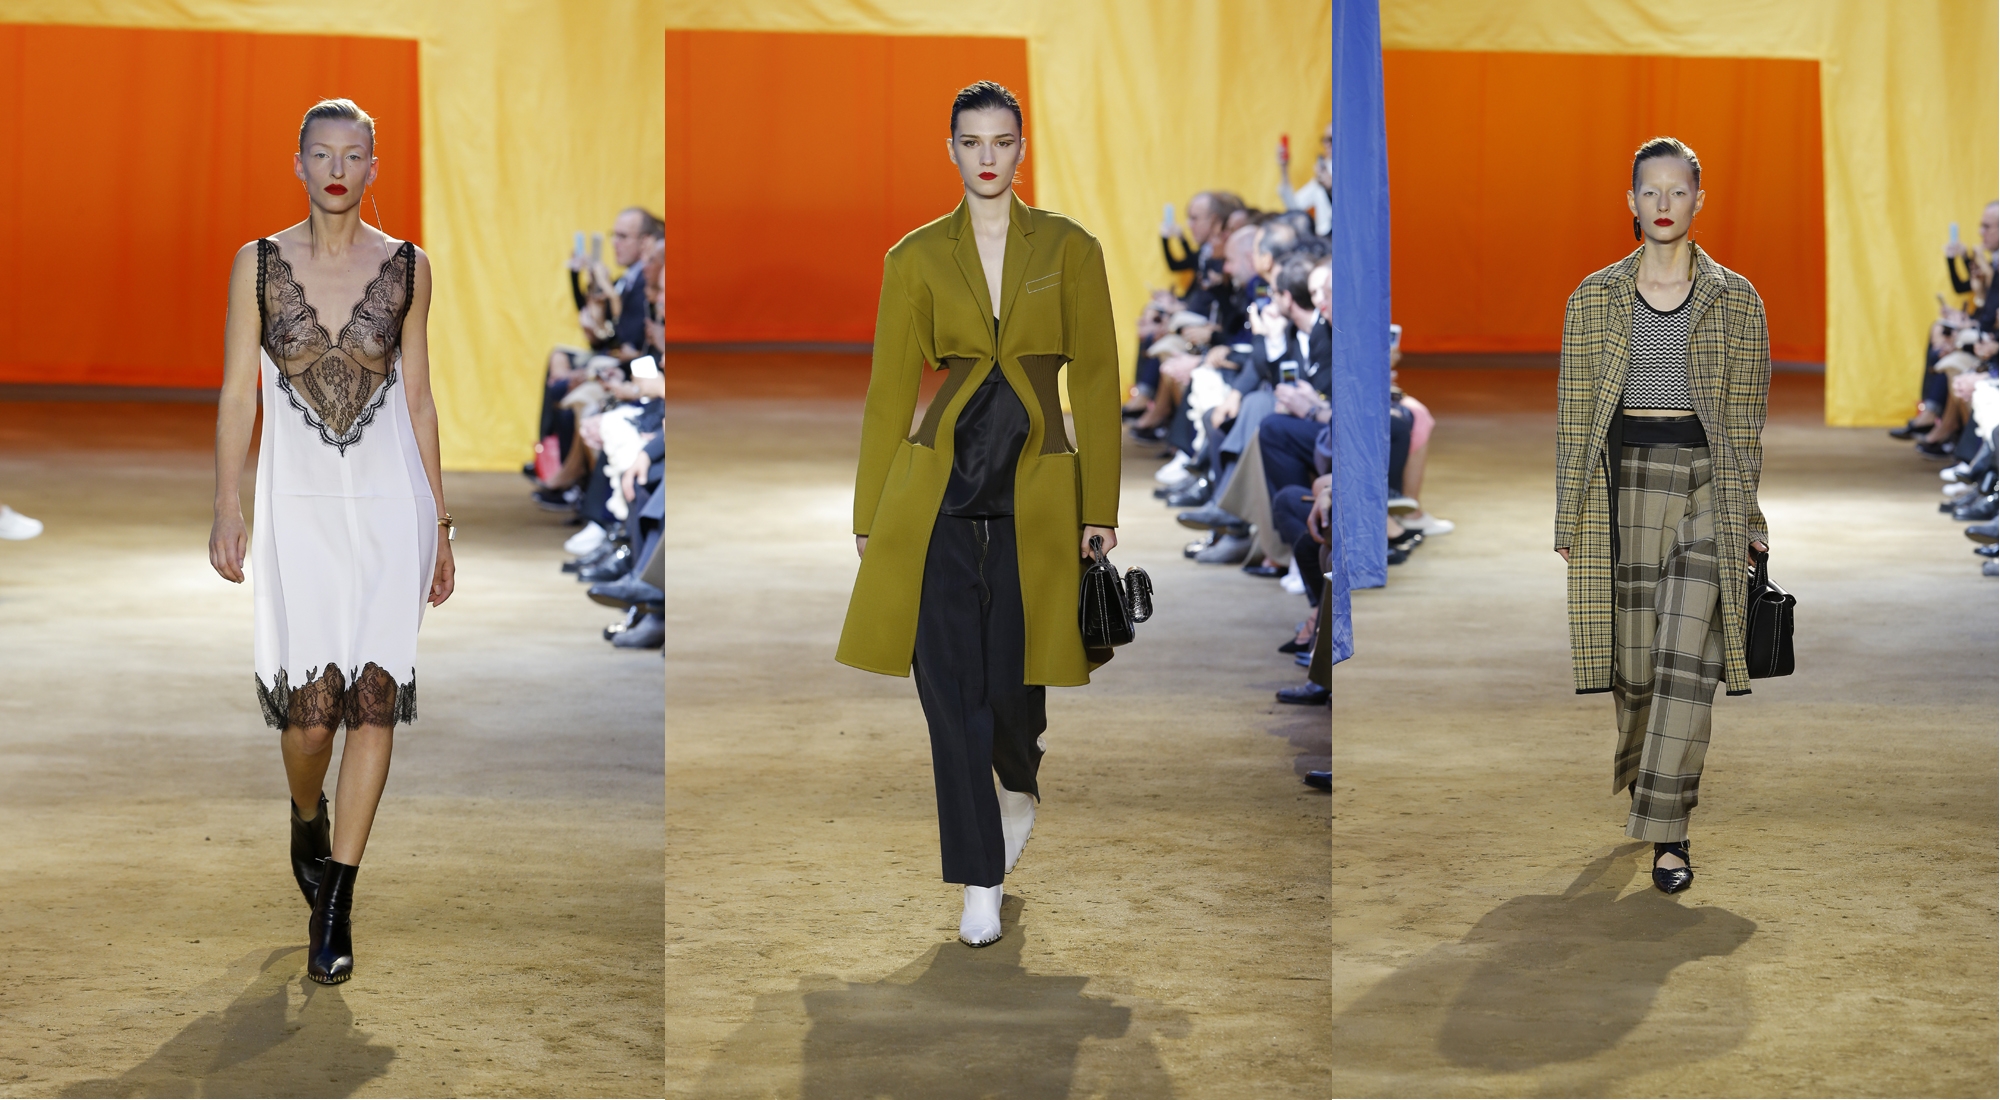 Paris Fashion Week captures the spirit of the times - LVMH